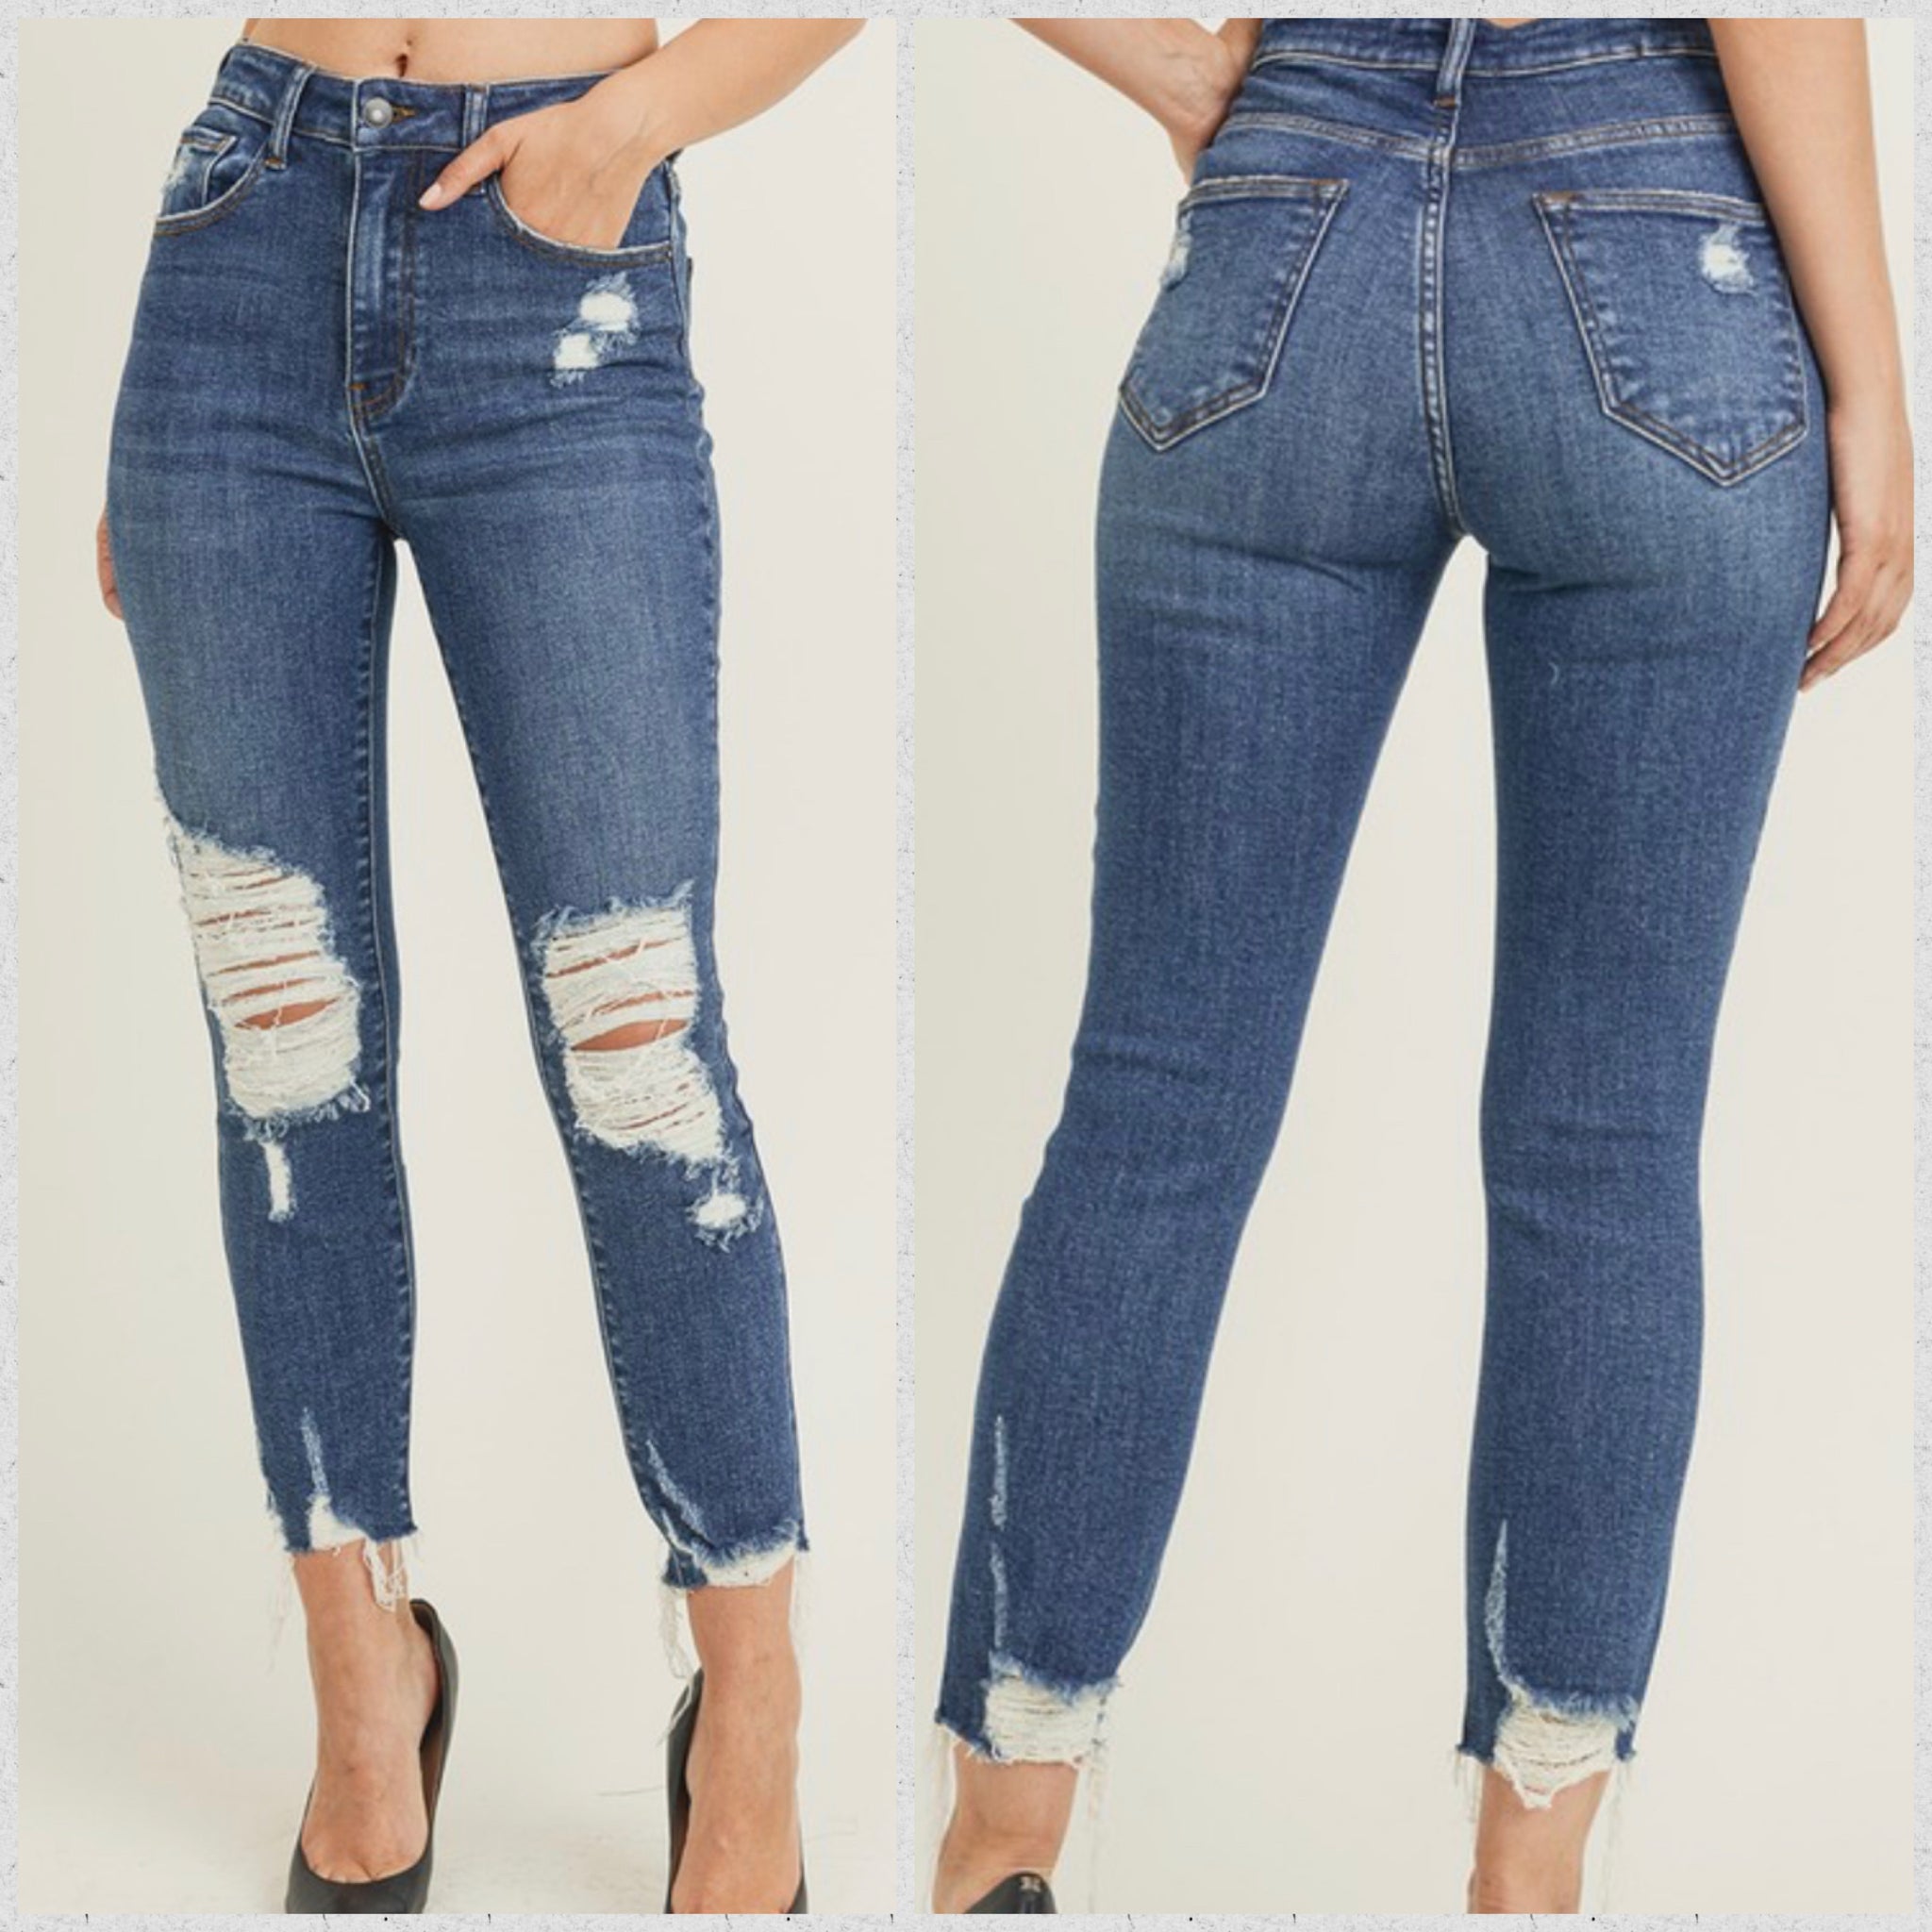 Risen “Esther“ High Rise Distressed Raw Edge Skinny Jeans